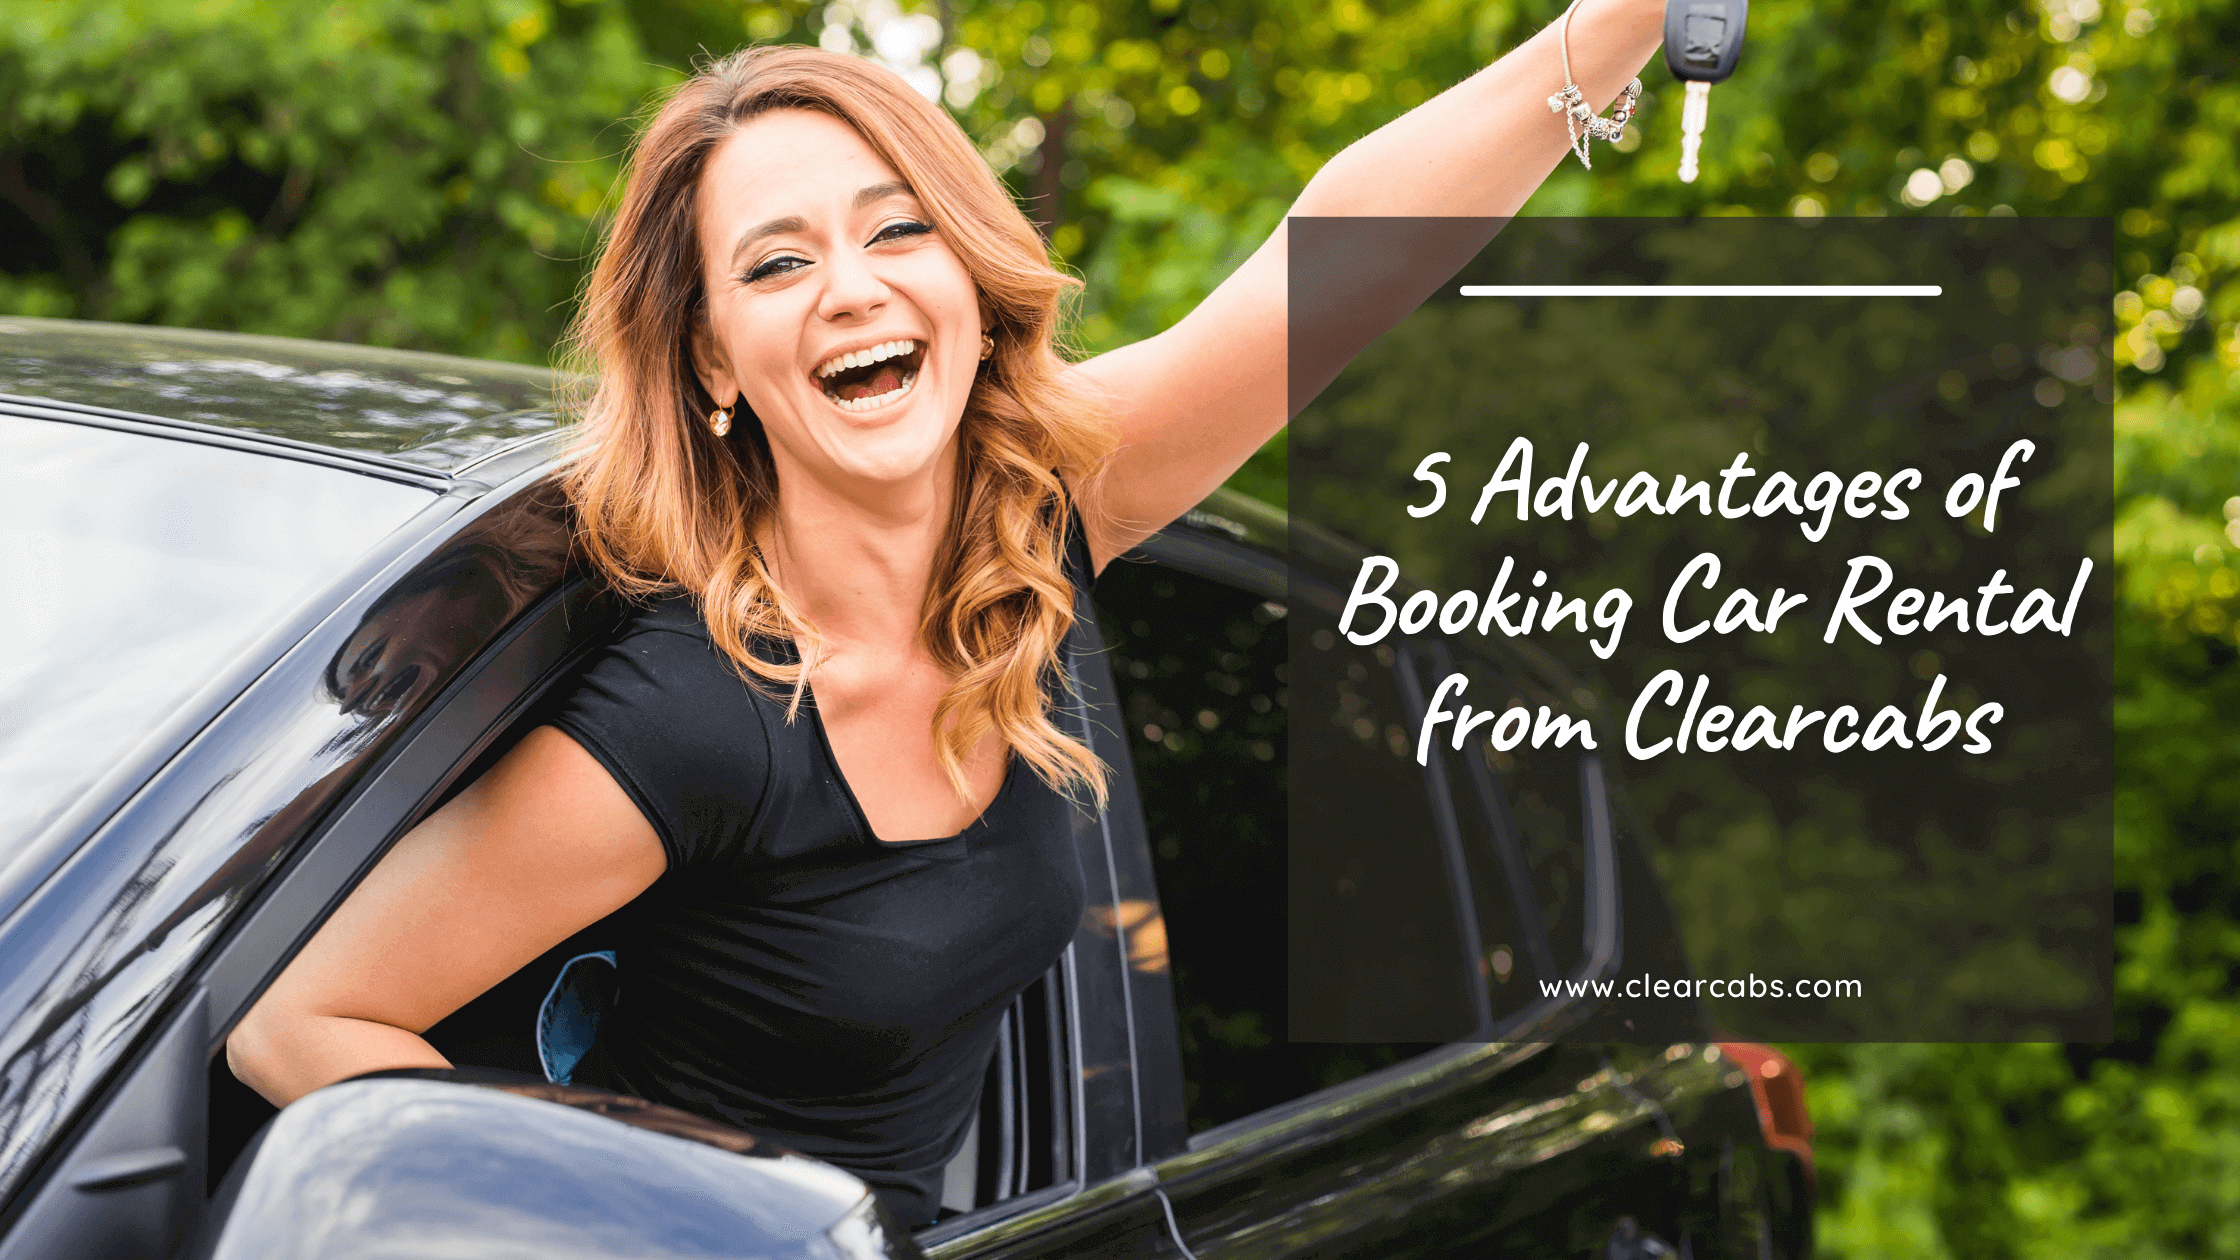 5 Advantages of Booking Car Rental from Clearcabs